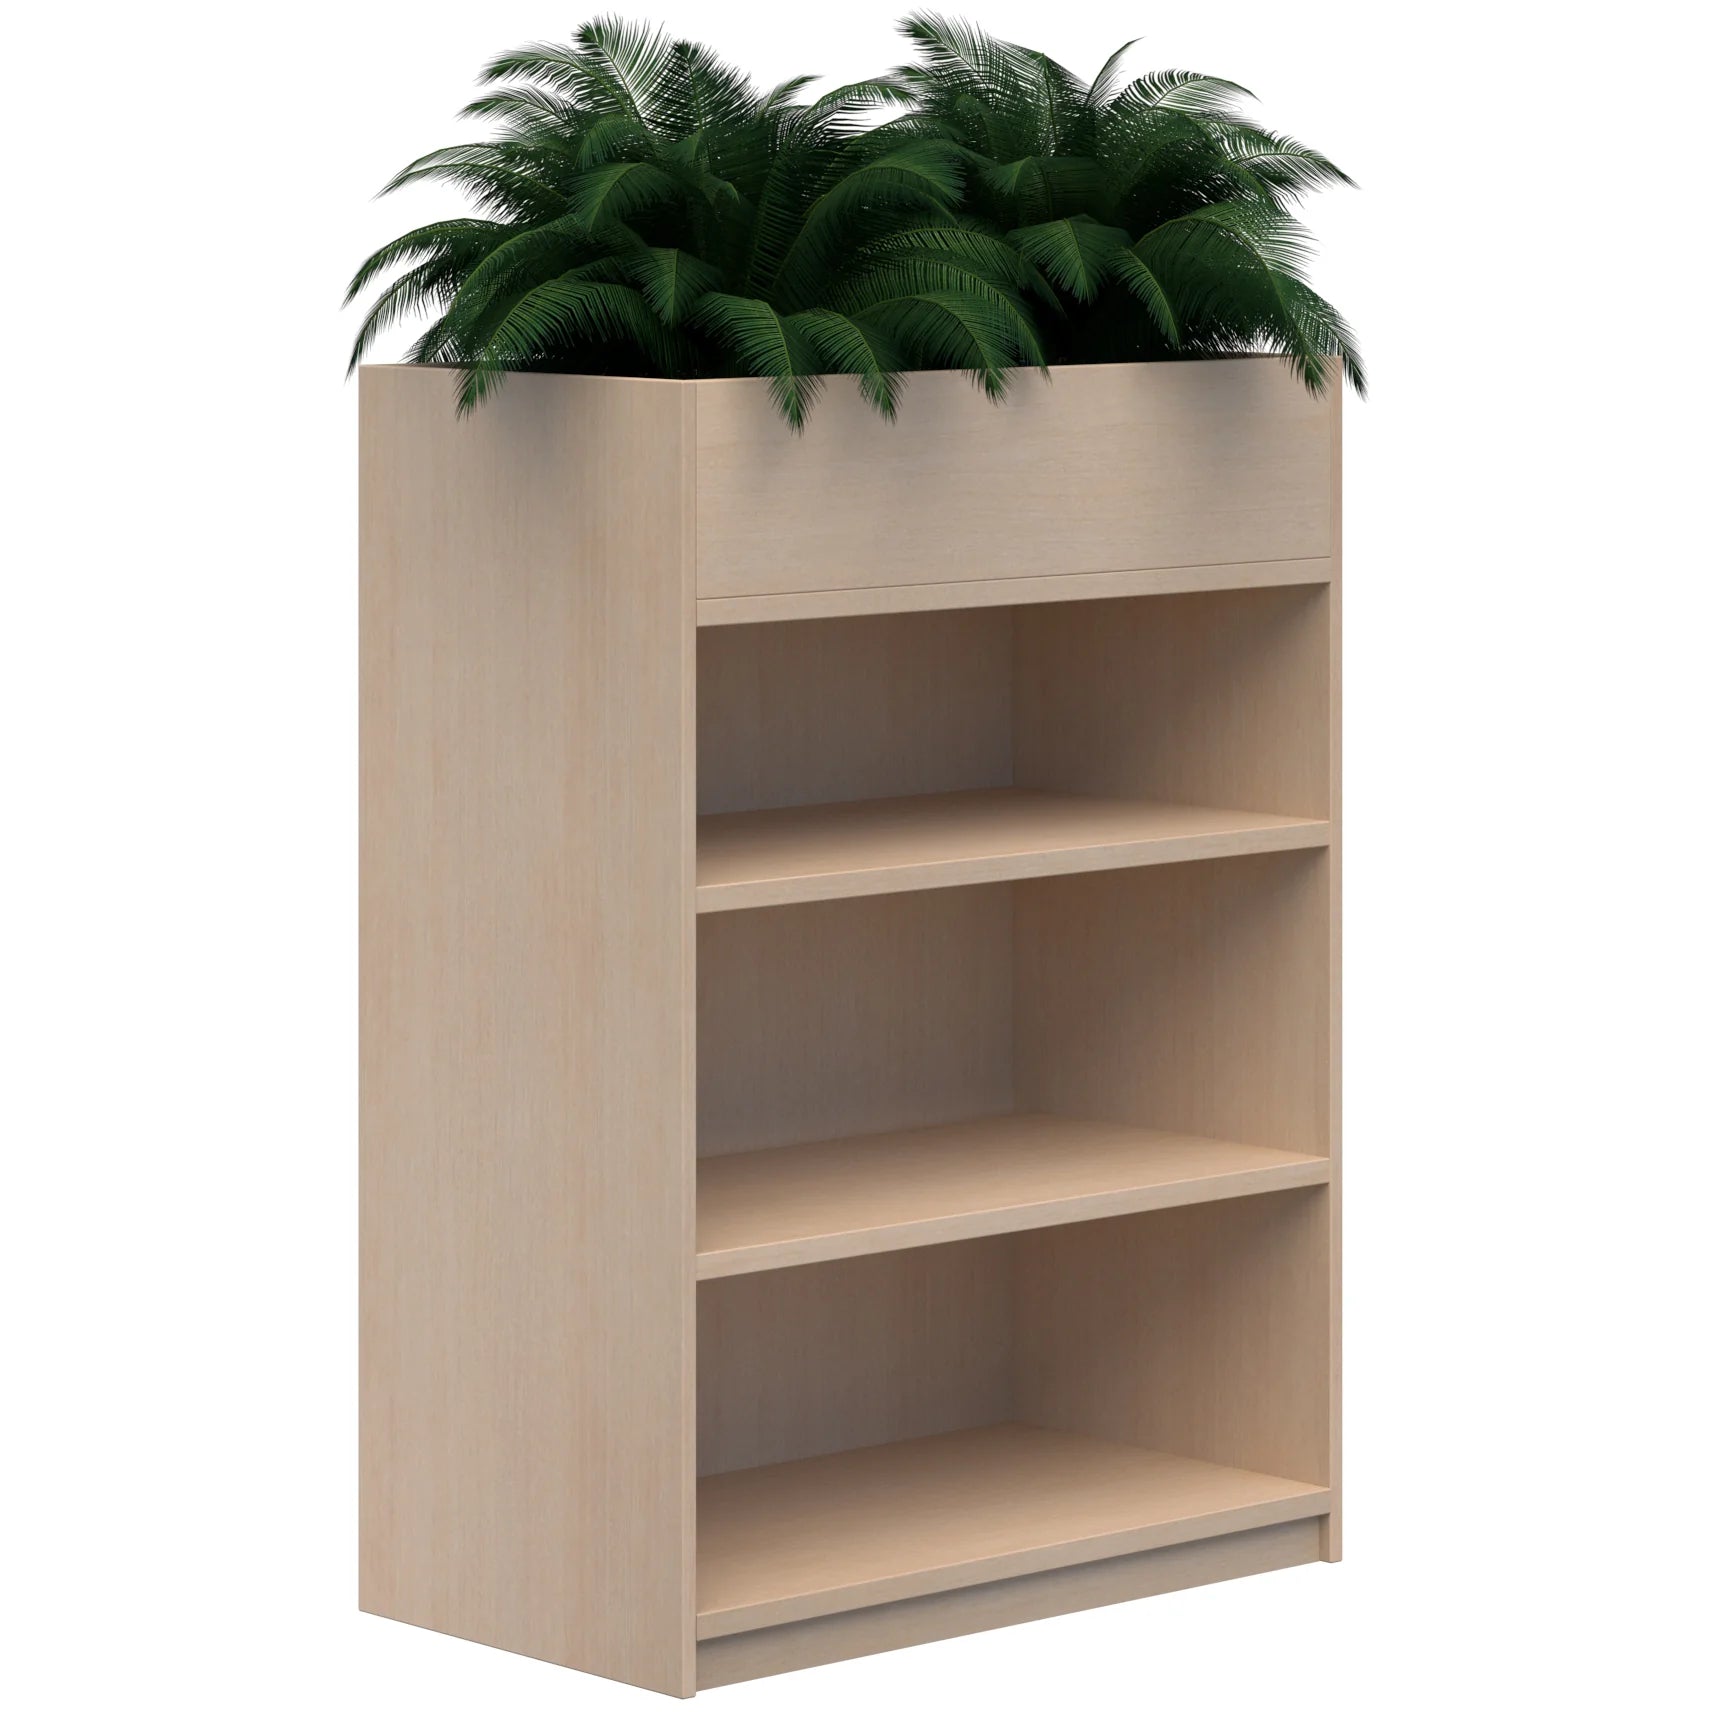 Three tier bookcase with built in planter box on top in refined oak colour.